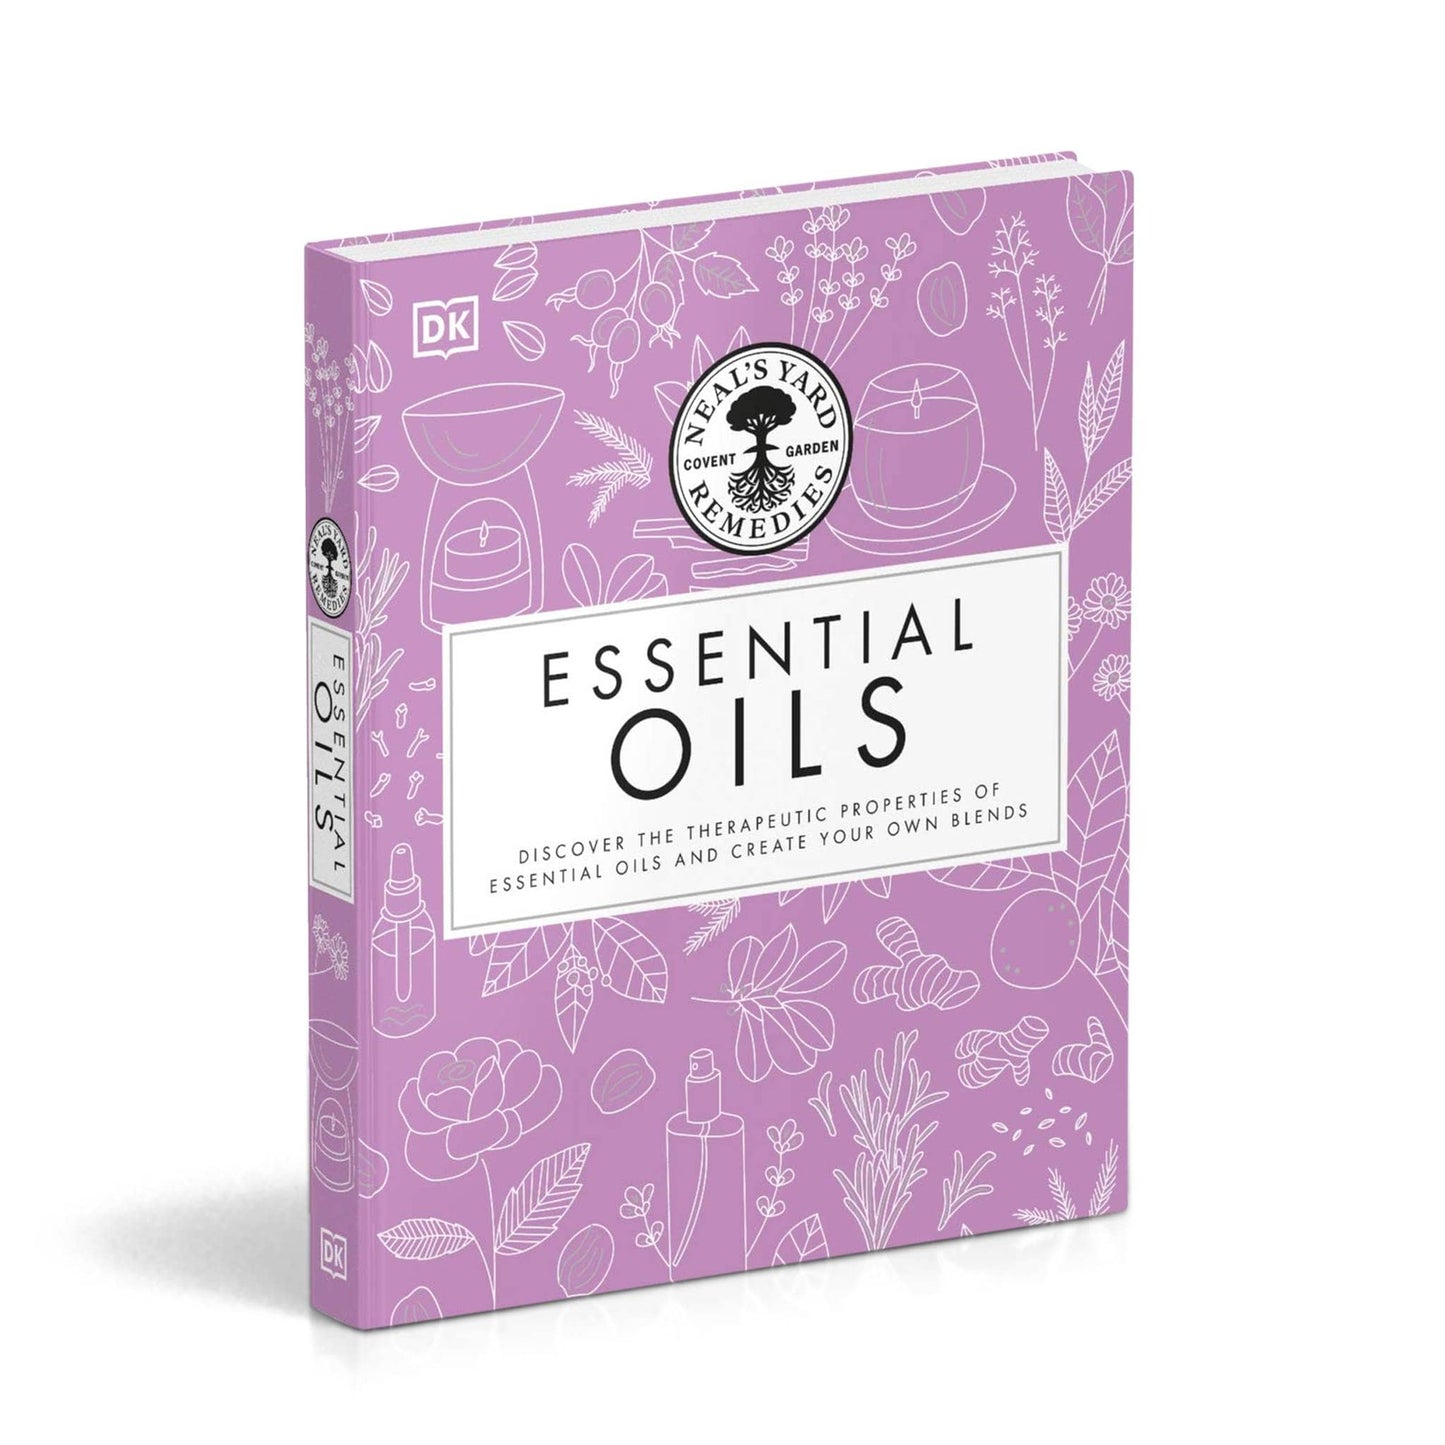 Our Bookshelf Print Books Essential Oils - Discover therapeutic properties of essential oils & create your own blends - Neal’s Yard Remedies